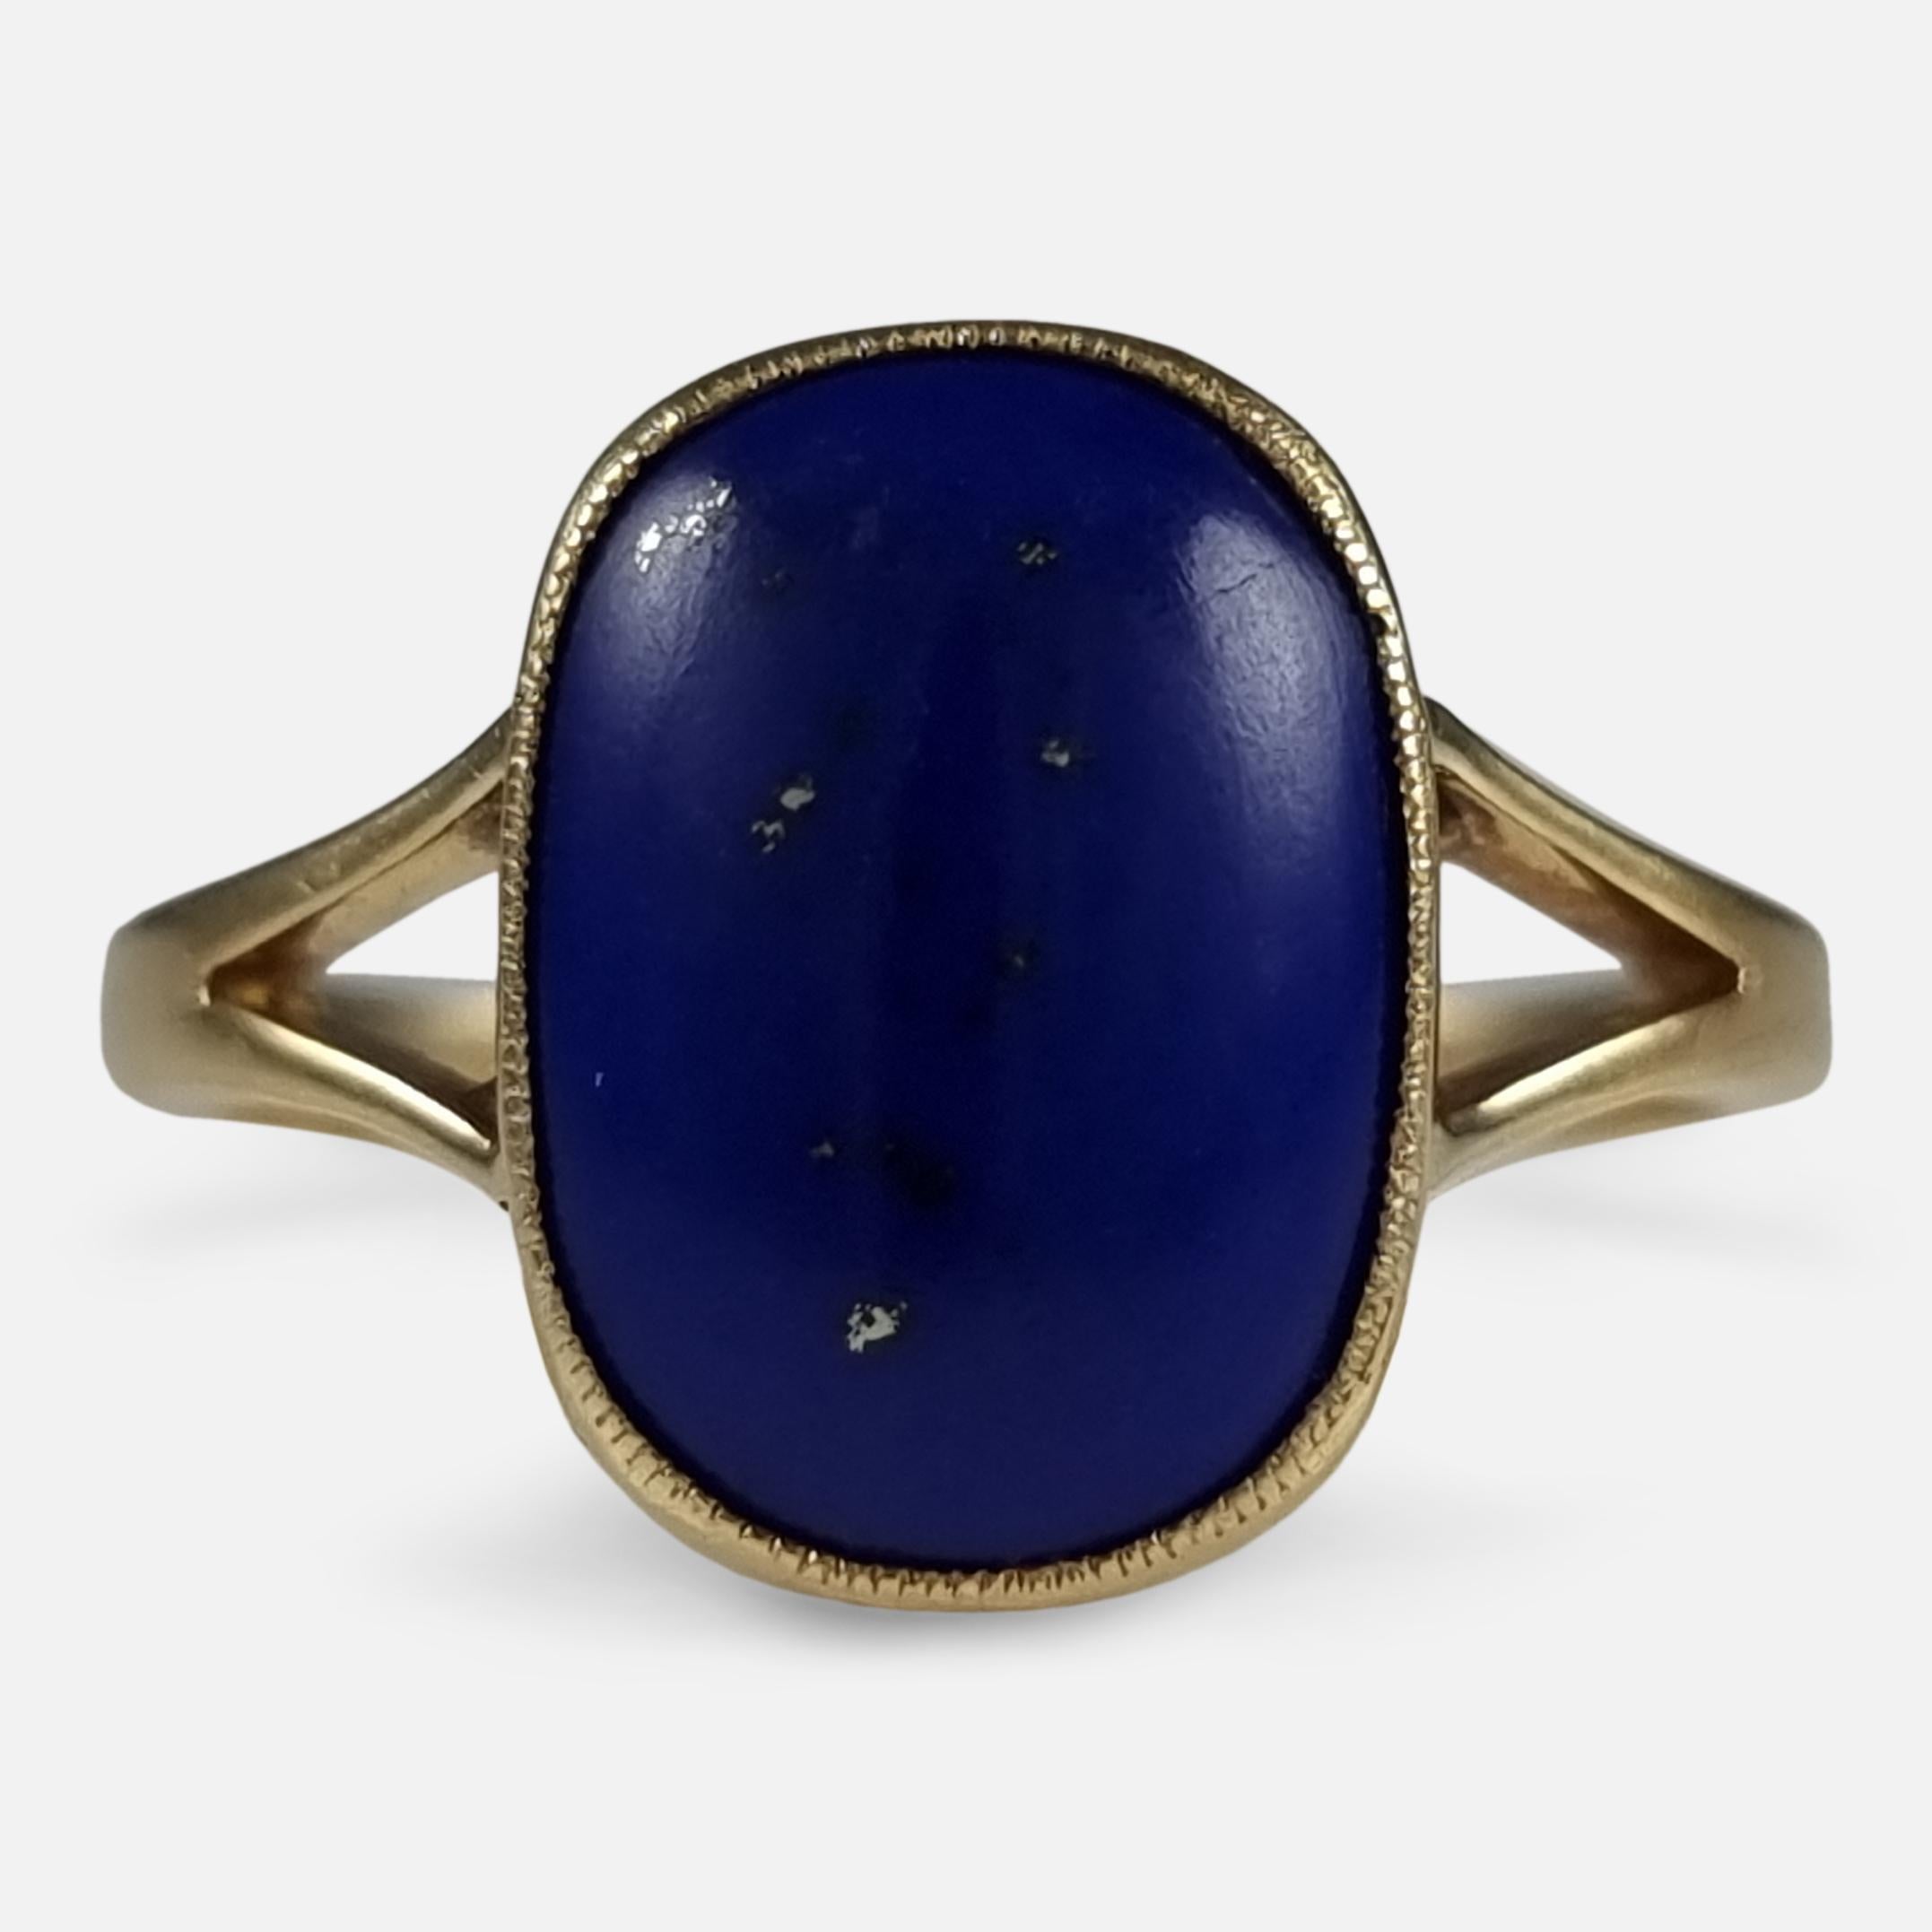 An antique George V 18ct yellow gold Lapis Lazuli cabochon ring. The oblong lapis cabochon is bezel set, leading to bifurcated shoulders, and plain gold shank.

The ring is hallmarked with Birmingham marks, date letter 'r' to denote 1916, and